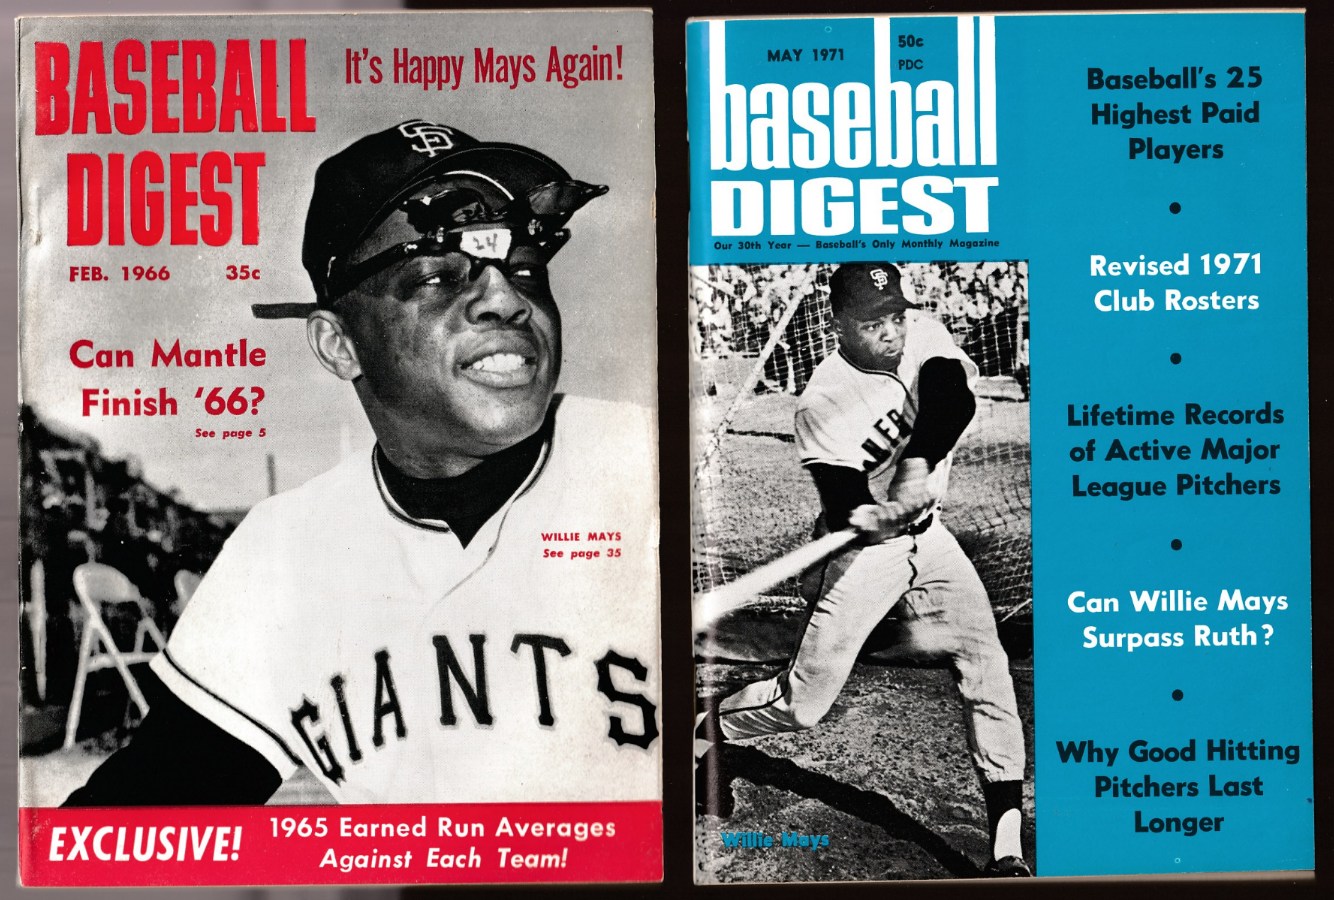 Willie Mays - Baseball Digest 1971 - 'Can Willie Mays Surpass Ruth ?' Baseball cards value